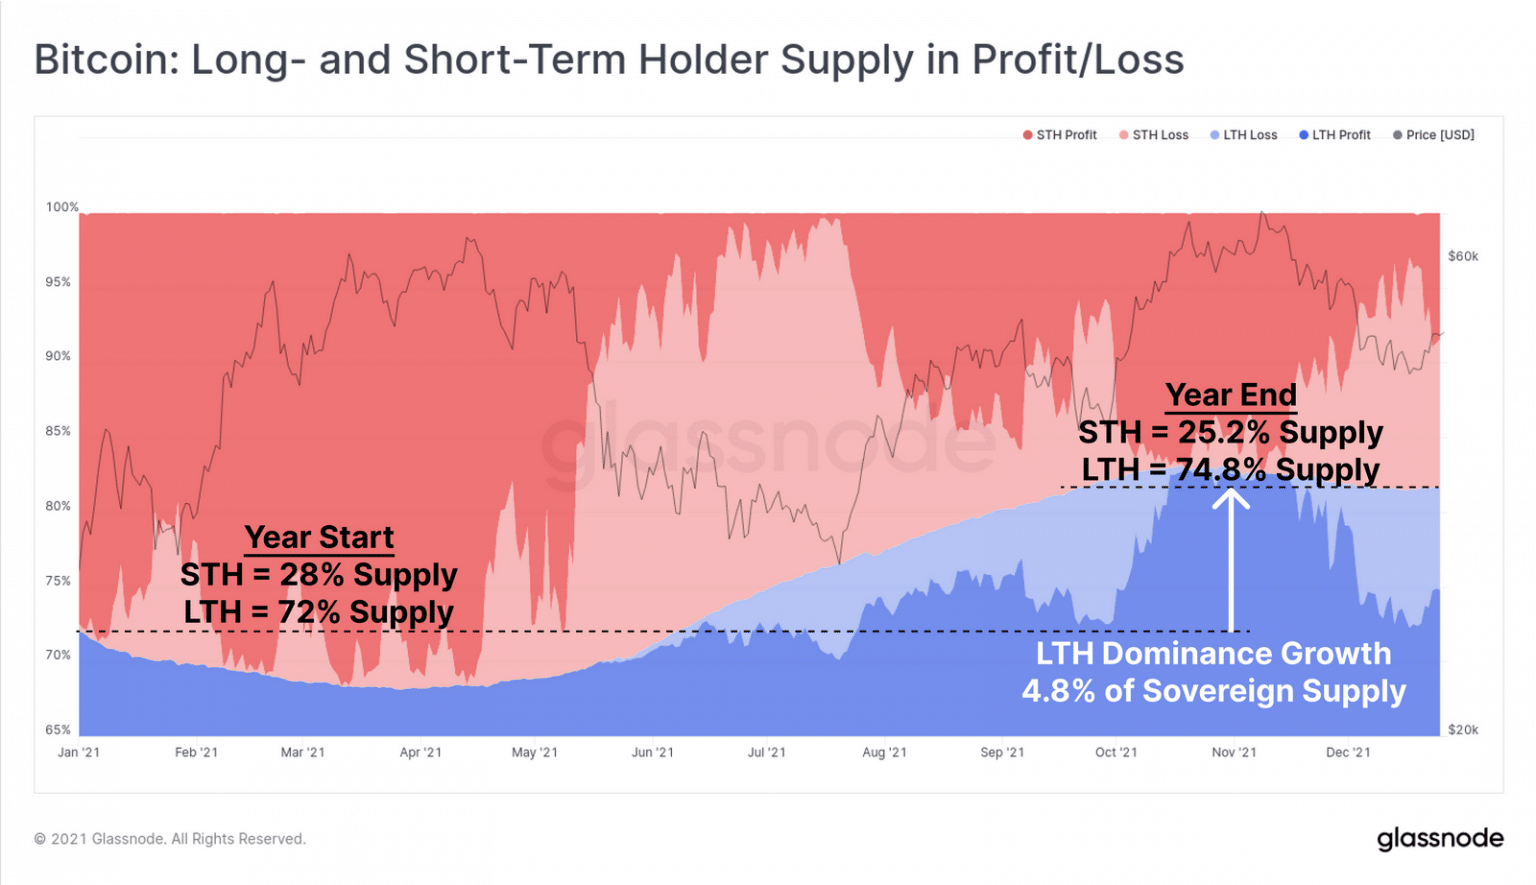 Long/short holders and their profits (Source: Glassnode)